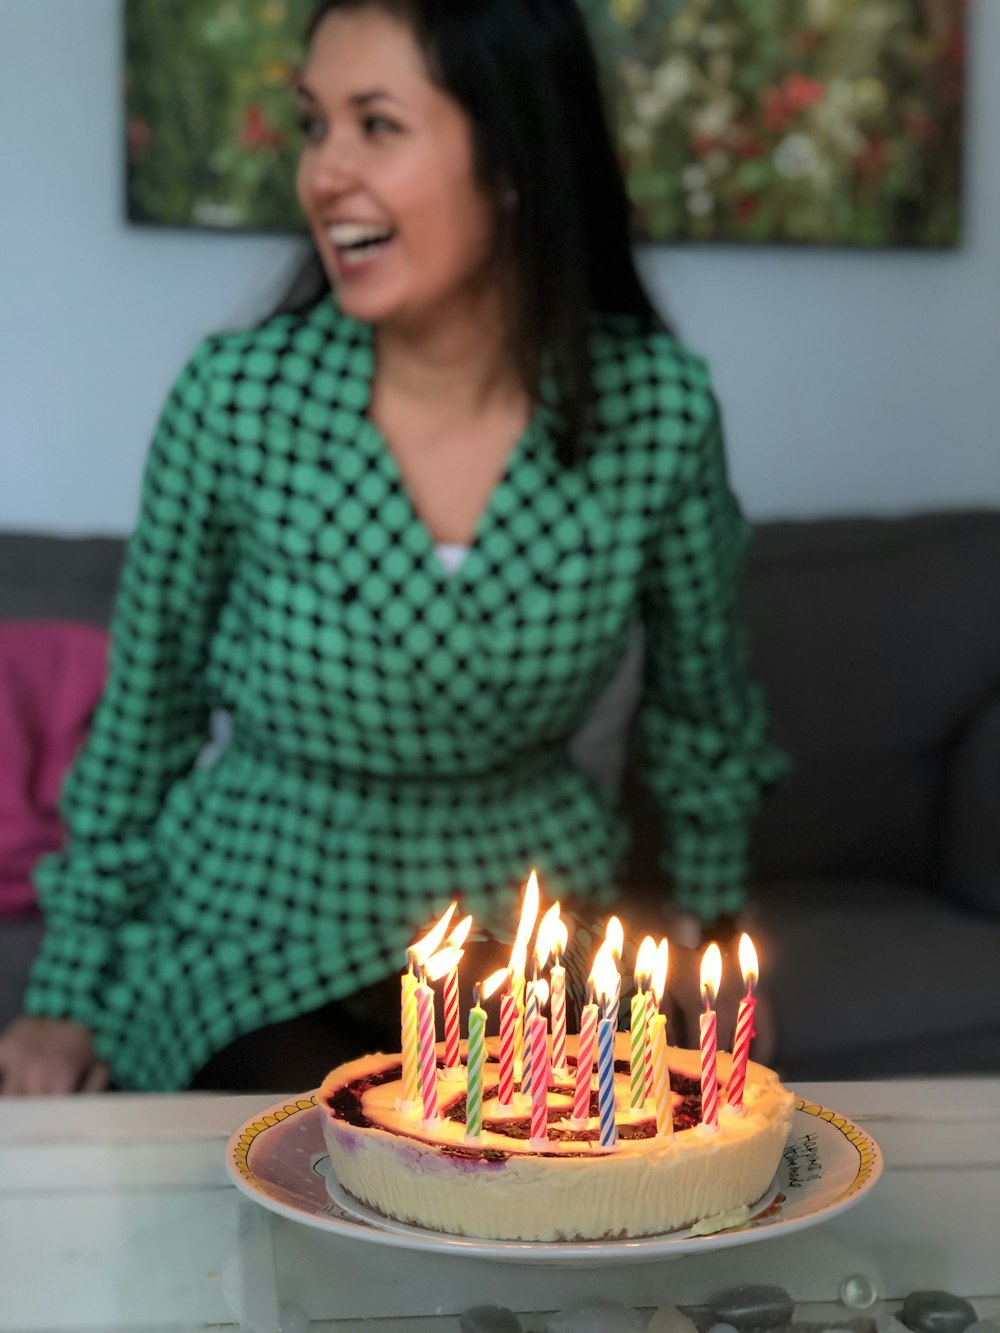 smiling woman in front of cake